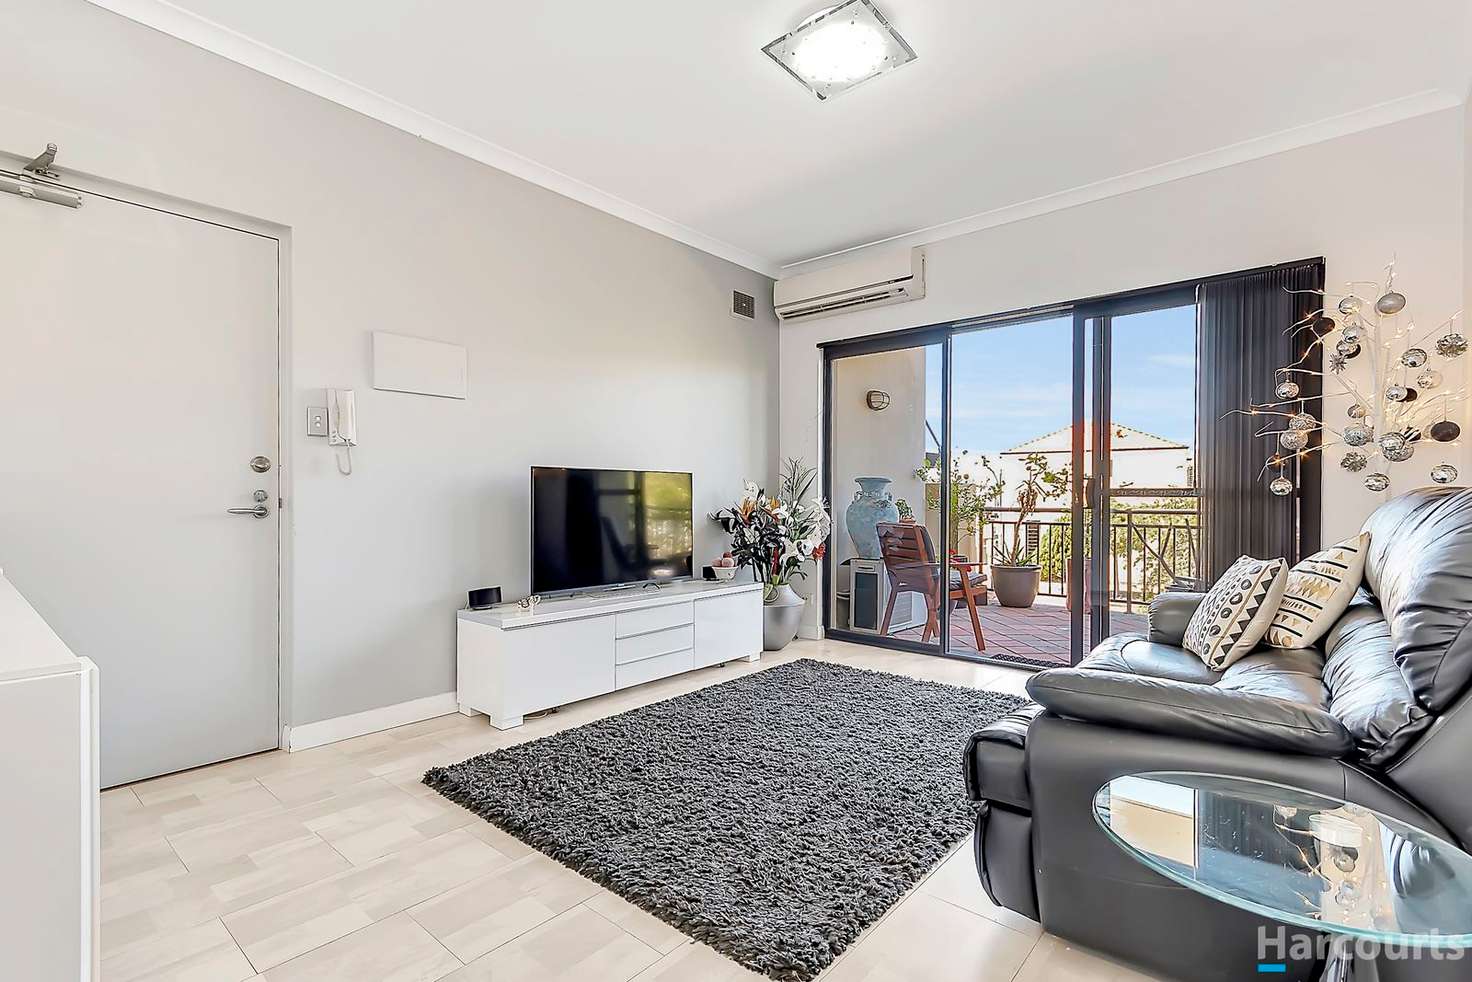 Main view of Homely apartment listing, 5/1 Shoveler Terrace, Joondalup WA 6027